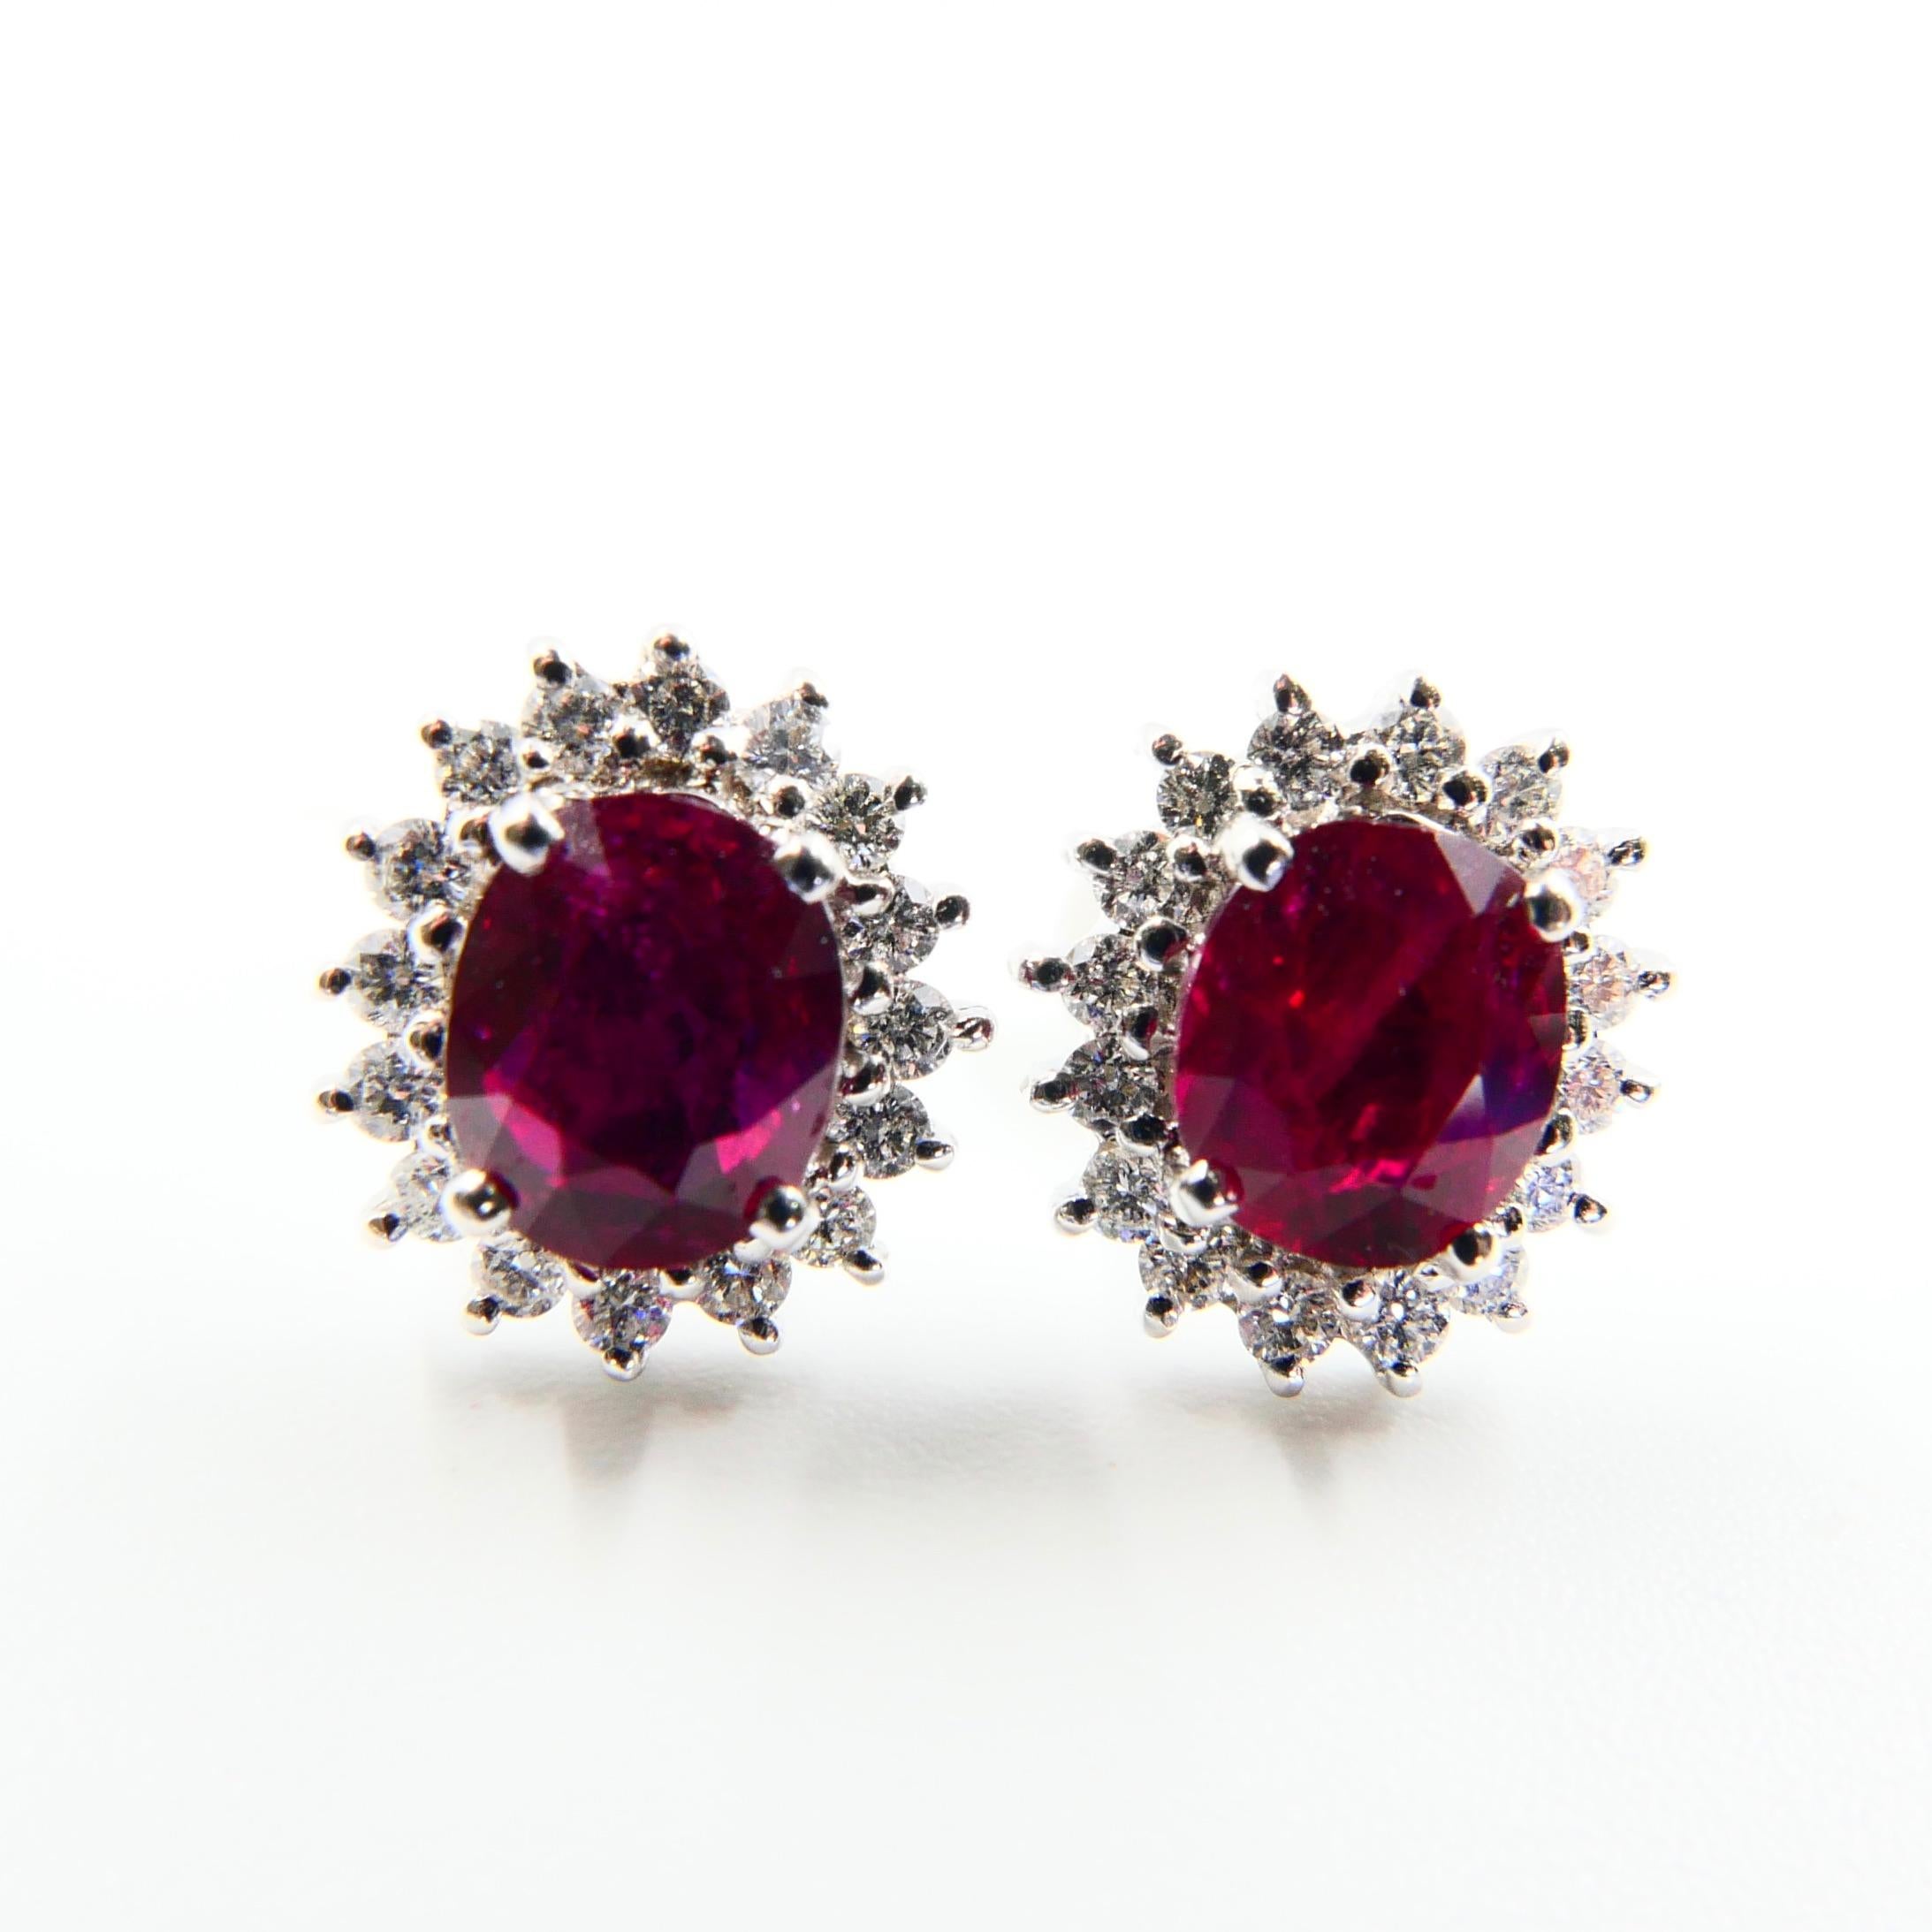 Vivid Red Ruby 2.09 Carat and Diamond Stud Earrings, Close to Pigeon Blood Red 3